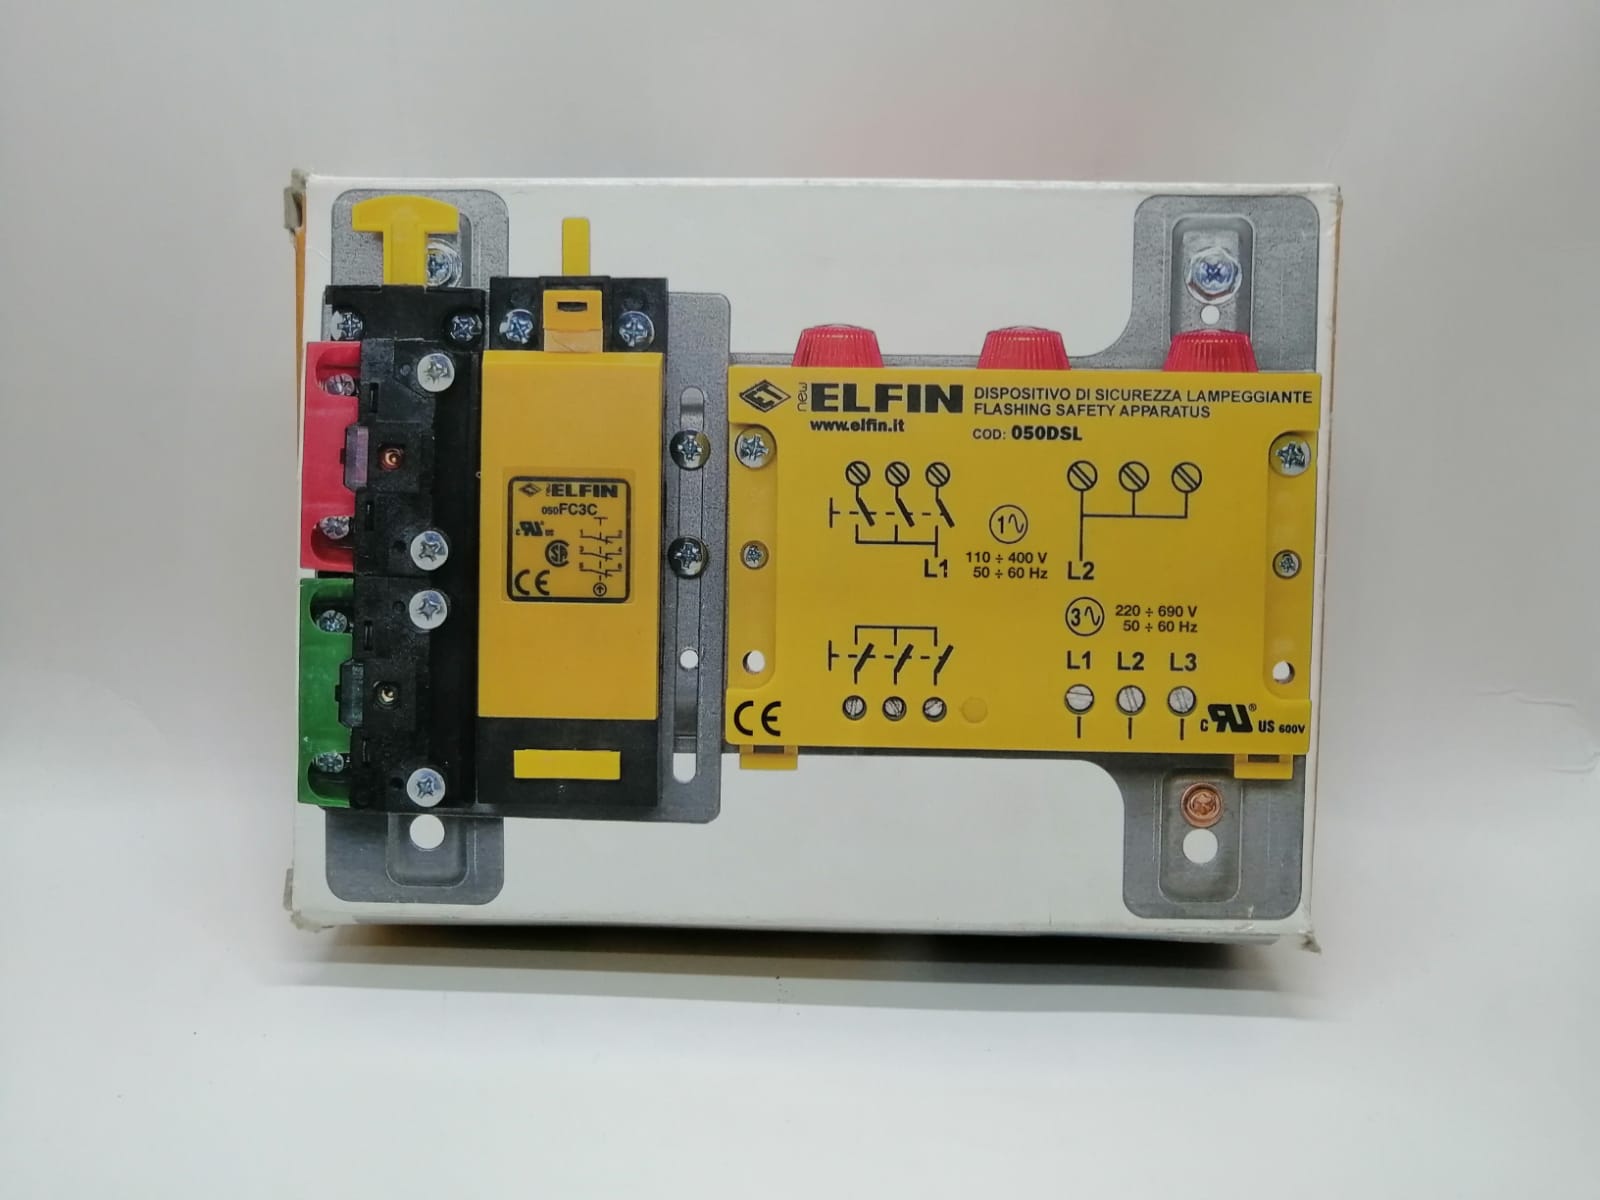 New | ELFIN | 050ASLFI12 | Flashing safety device, wired, with